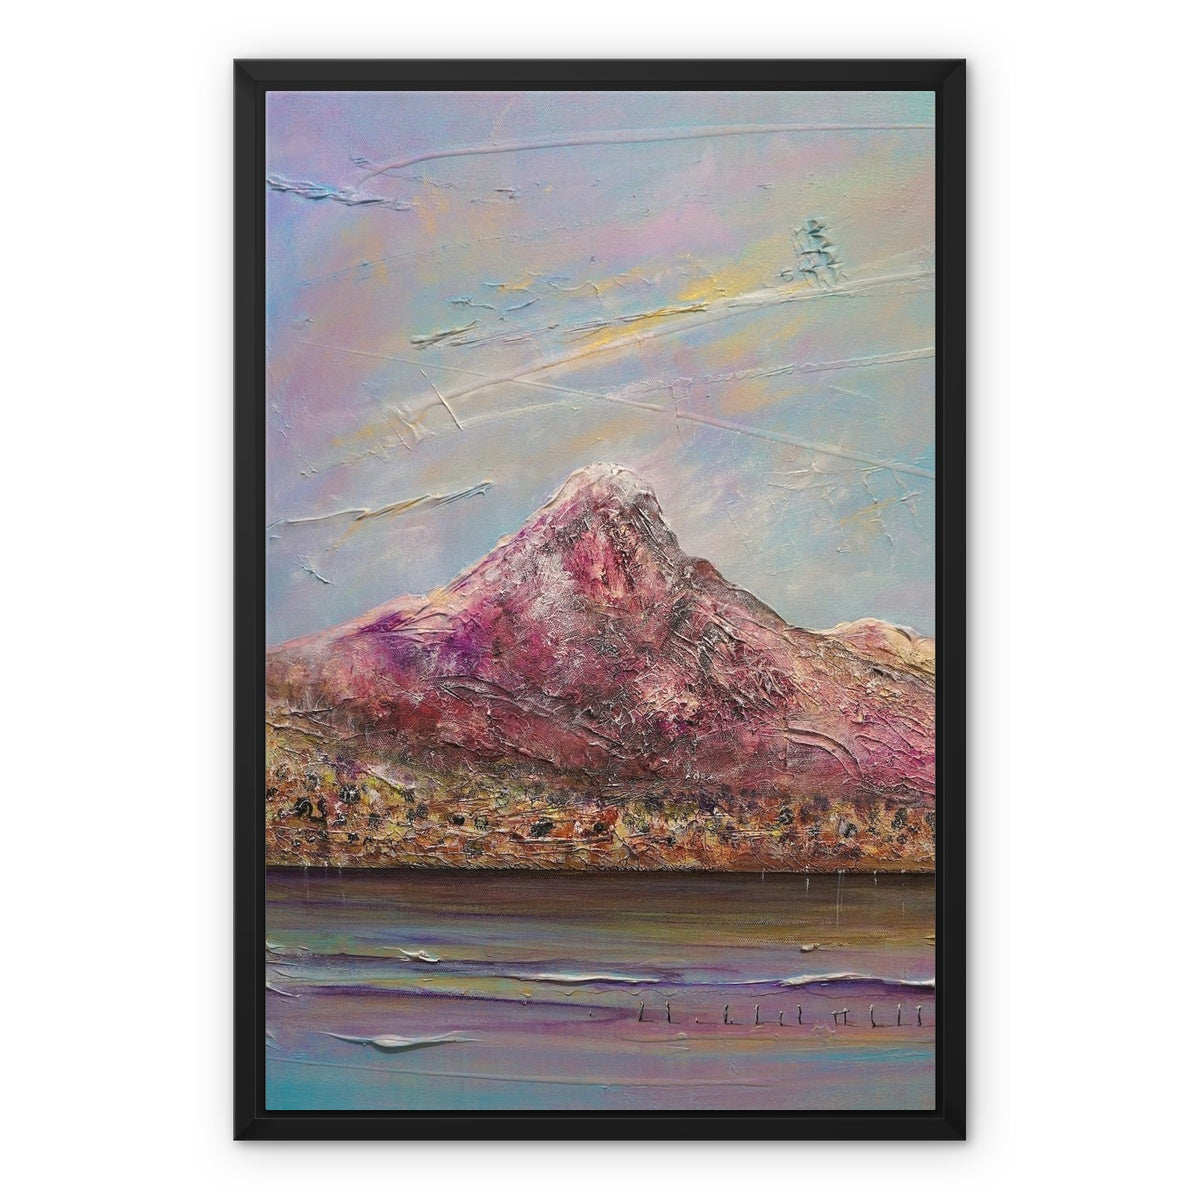 Ben Lomond Painting | Framed Canvas-Floating Framed Canvas Prints-Scottish Lochs & Mountains Art Gallery-18"x24"-Black Frame-Paintings, Prints, Homeware, Art Gifts From Scotland By Scottish Artist Kevin Hunter